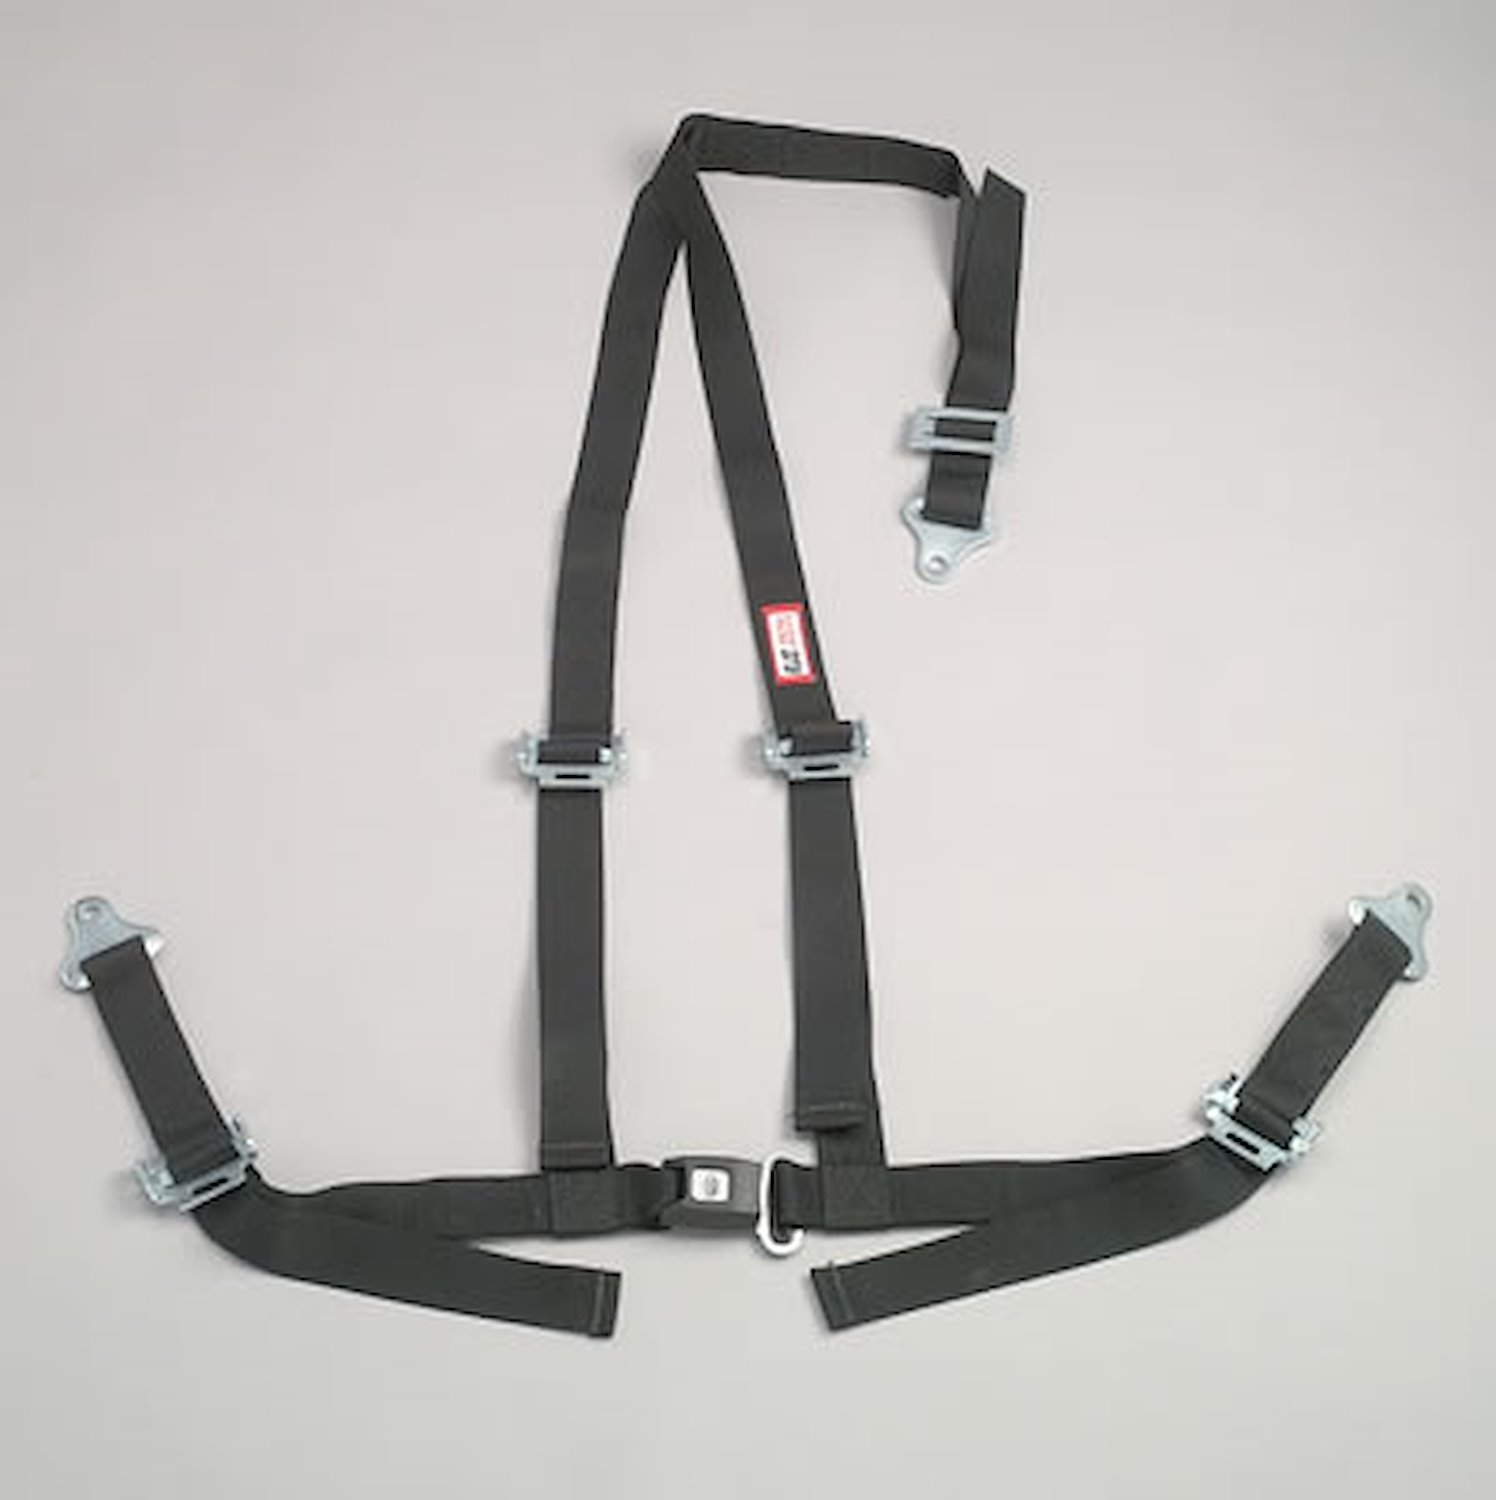 NON-SFI B&T HARNESS 2 PULL UP Lap Belt 2 S. H. V ROLL BAR Mount ALL SNAP ENDS w/STERNUM STRAP YELLOW